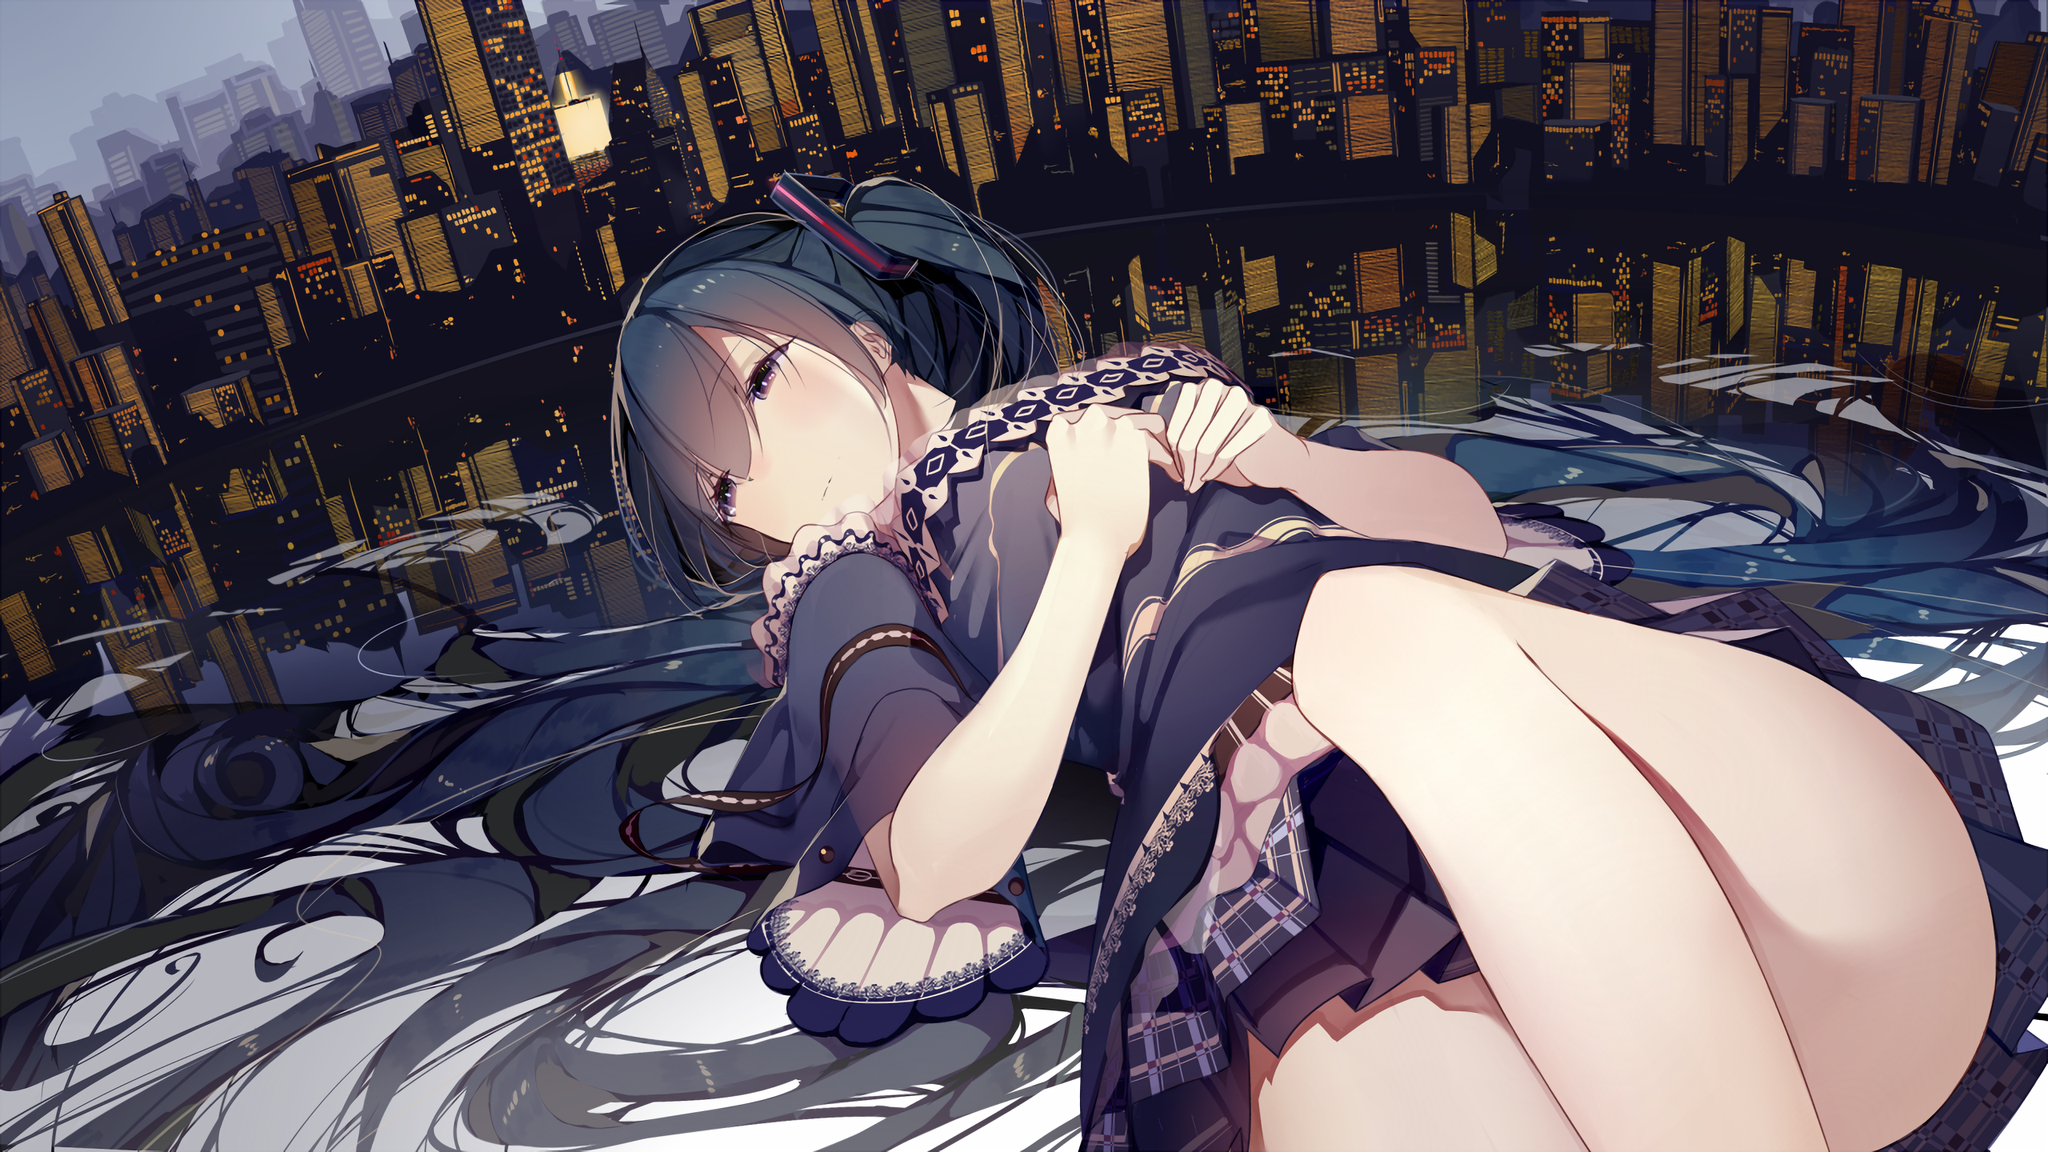 Anime 2048x1152 anime anime girls Hatsune Miku Vocaloid cityscape water Atha lying on back thighs lying down